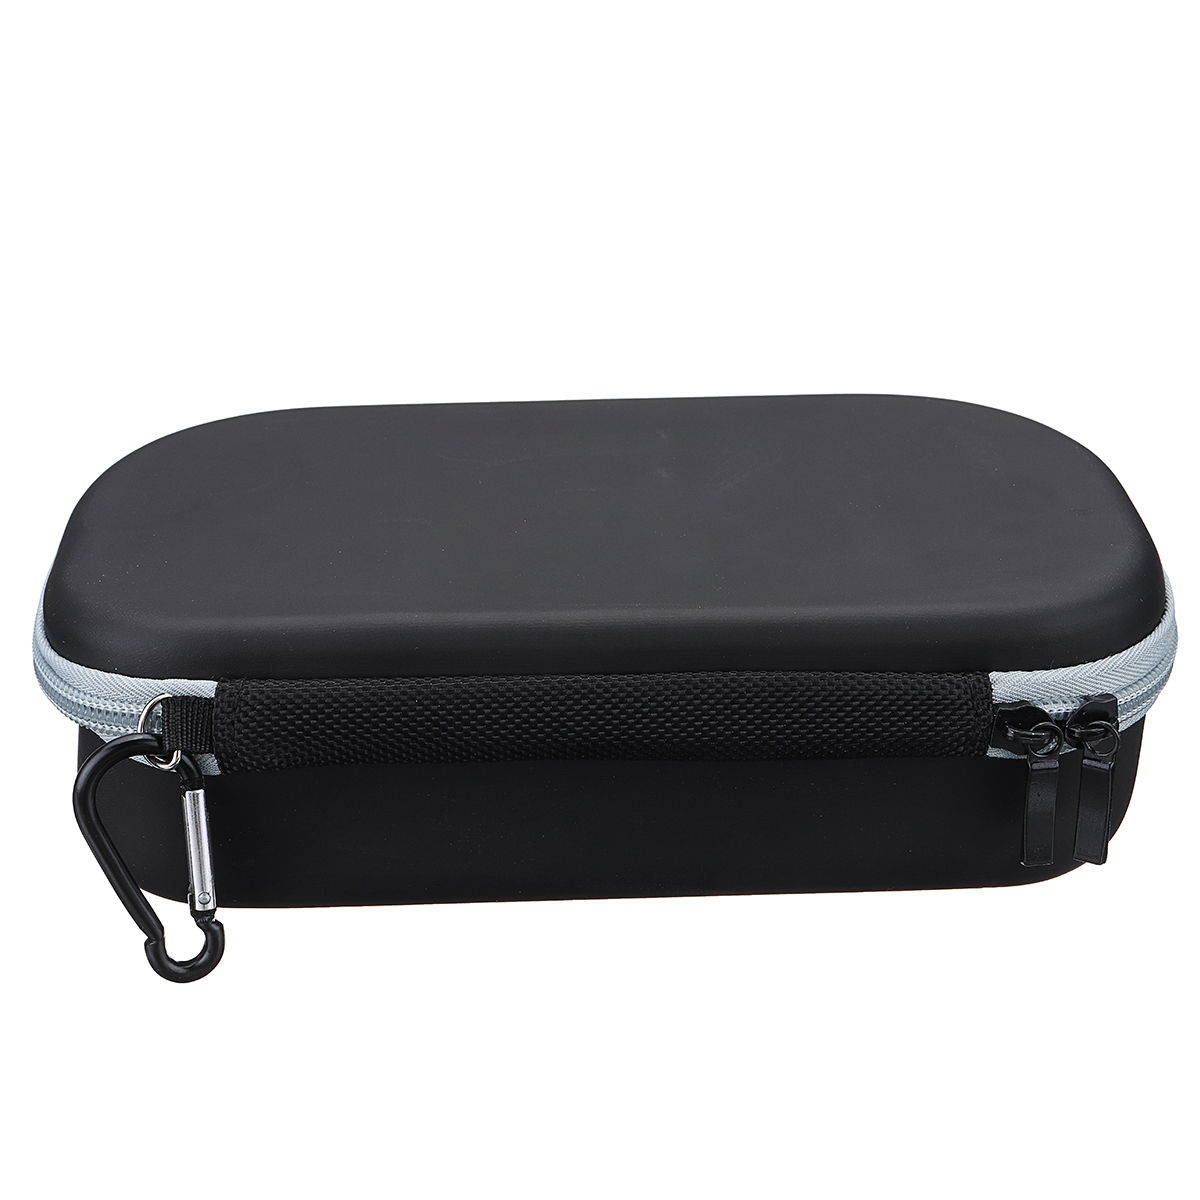 Portable-Storage-Case-EVA-Black-Hard-Cover-Protective-Carry-Case-for-psv1000-2000-Console-1974705-5